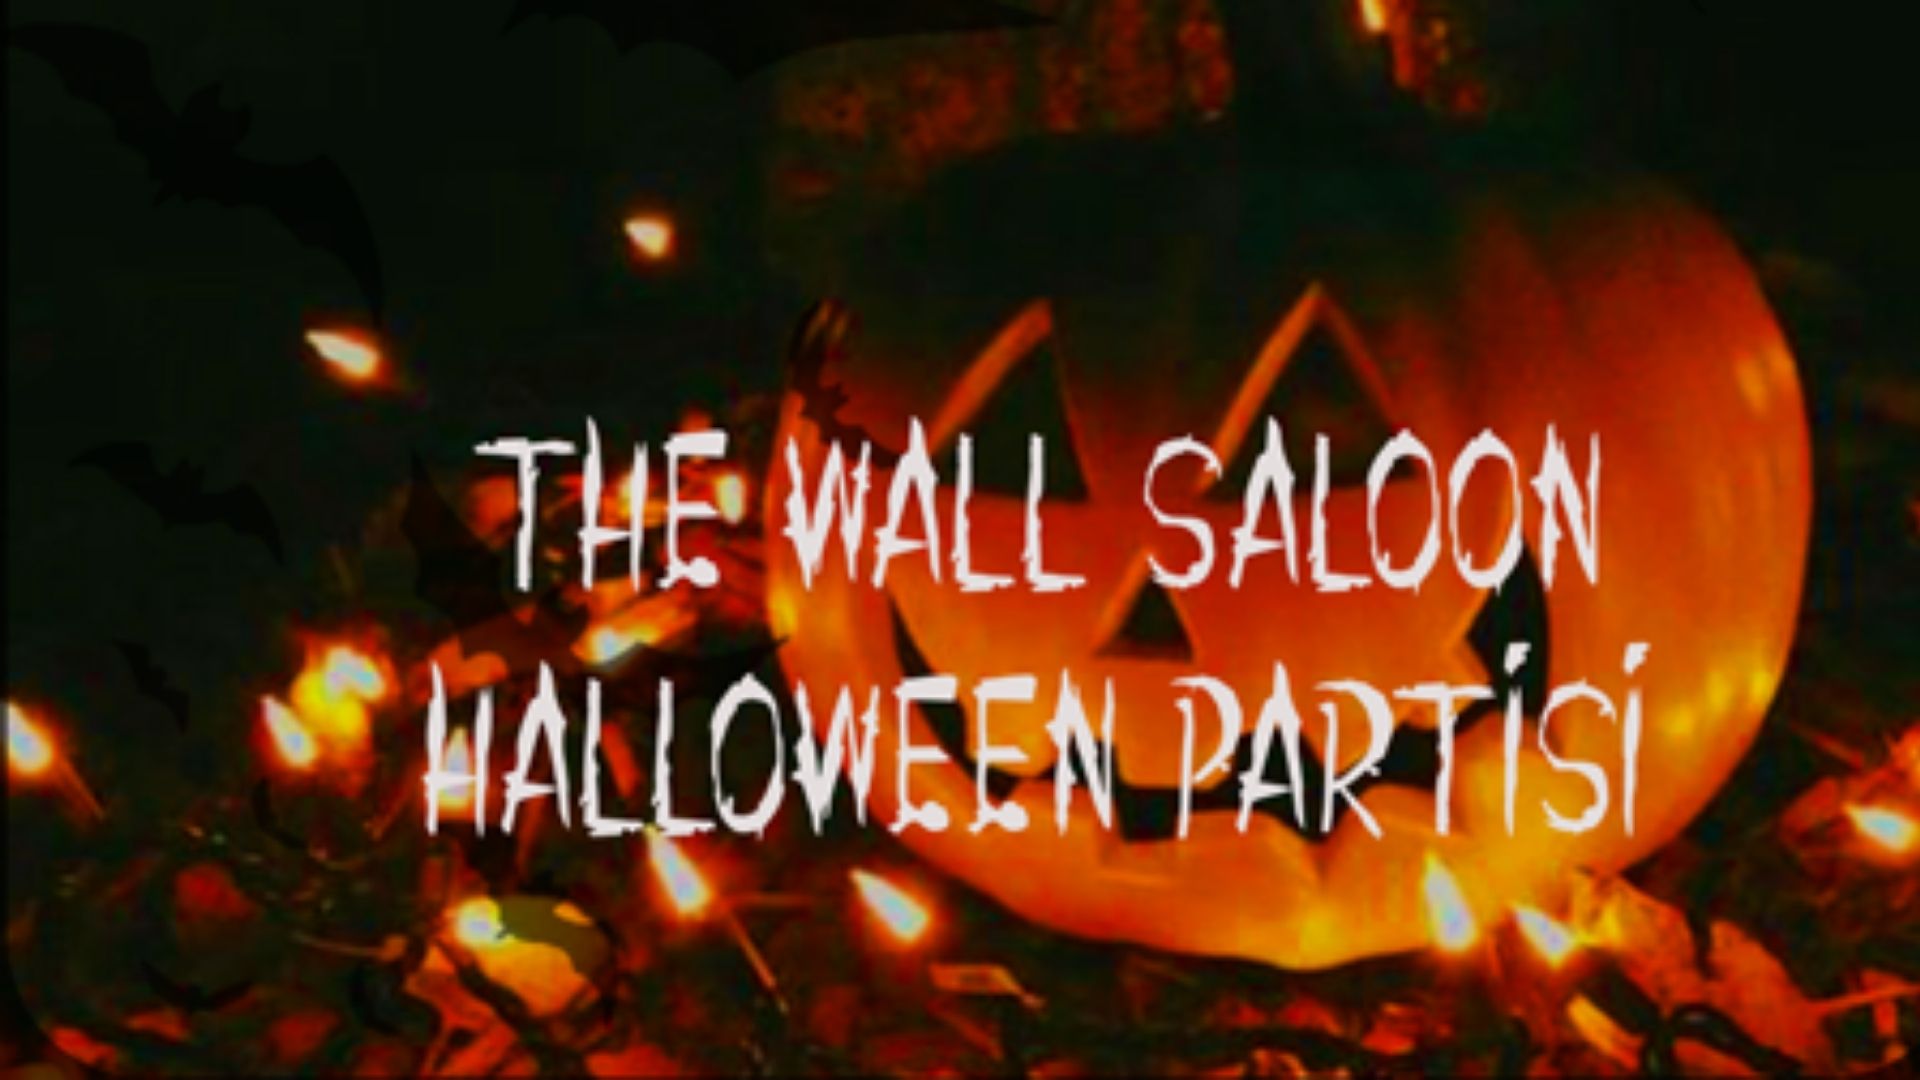 The Wall Saloon Halloween Partisi